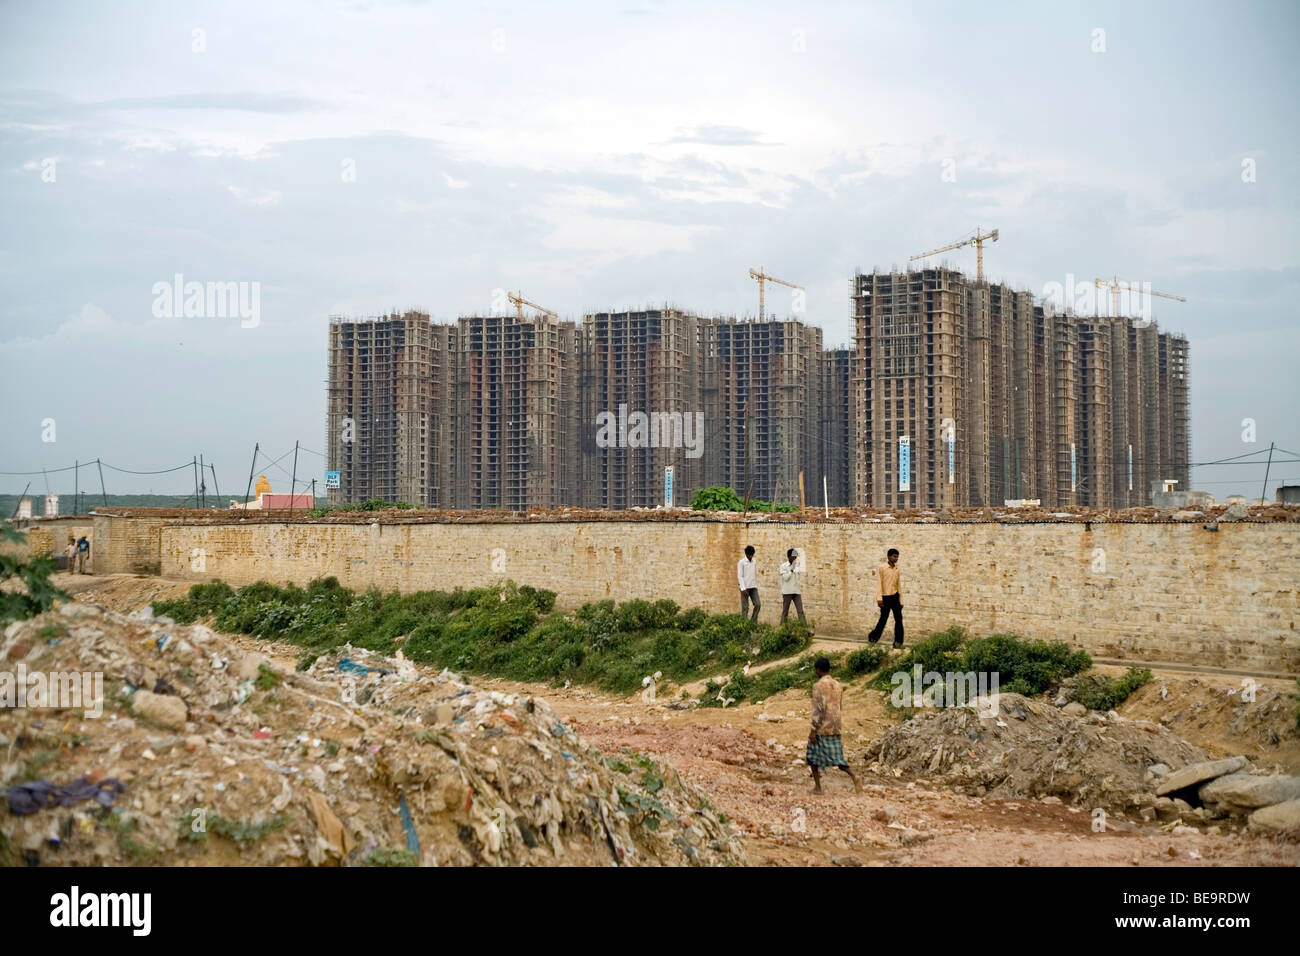 Men walking through a labour camp in the shadow of a new development in Gurgaon, India Stock Photo